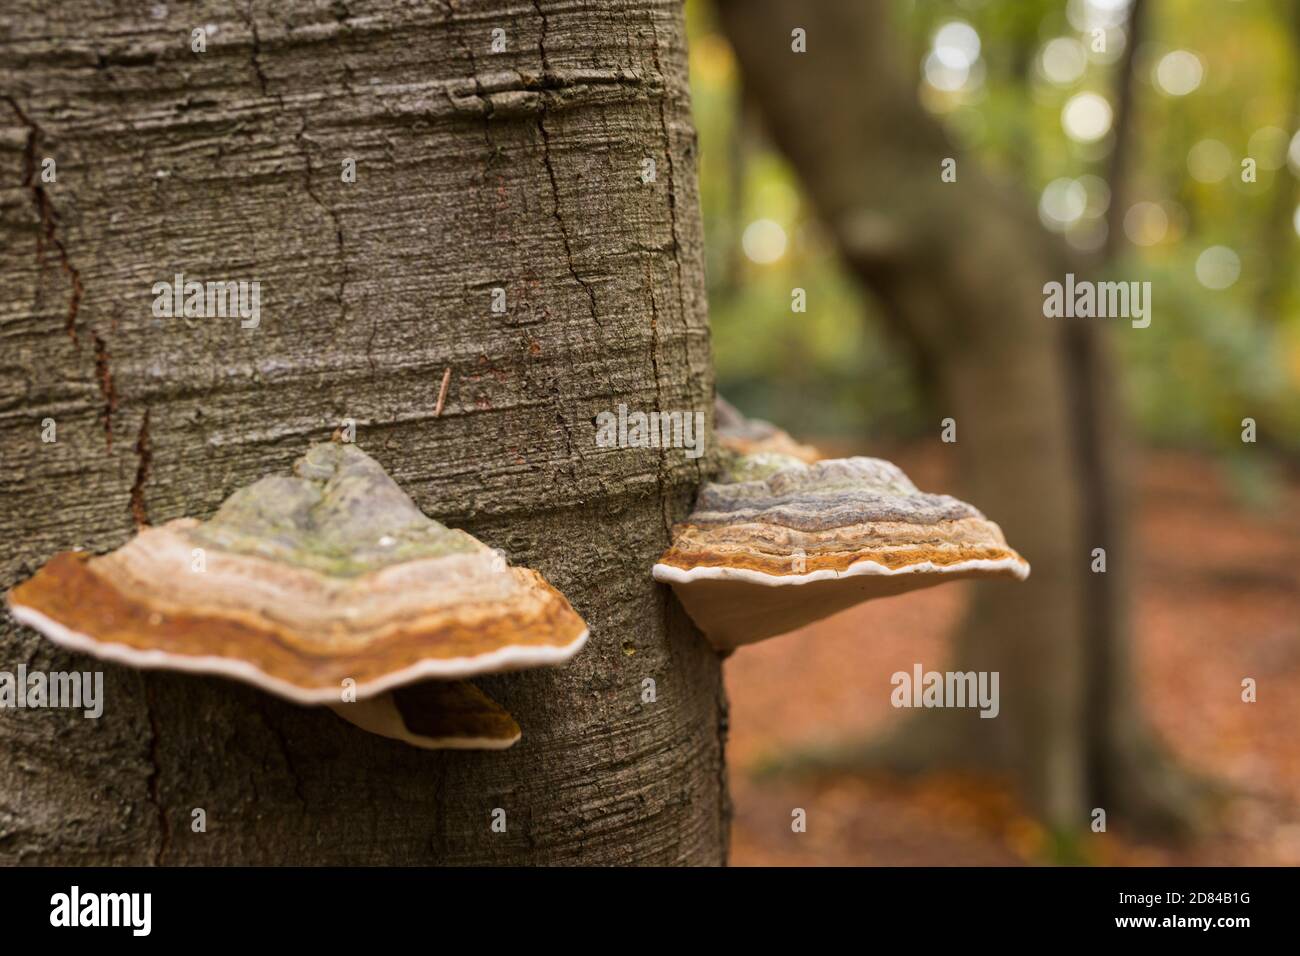 Tinder mushrooms growing on a beech tree trunk in a forest in the Netherlands Stock Photo